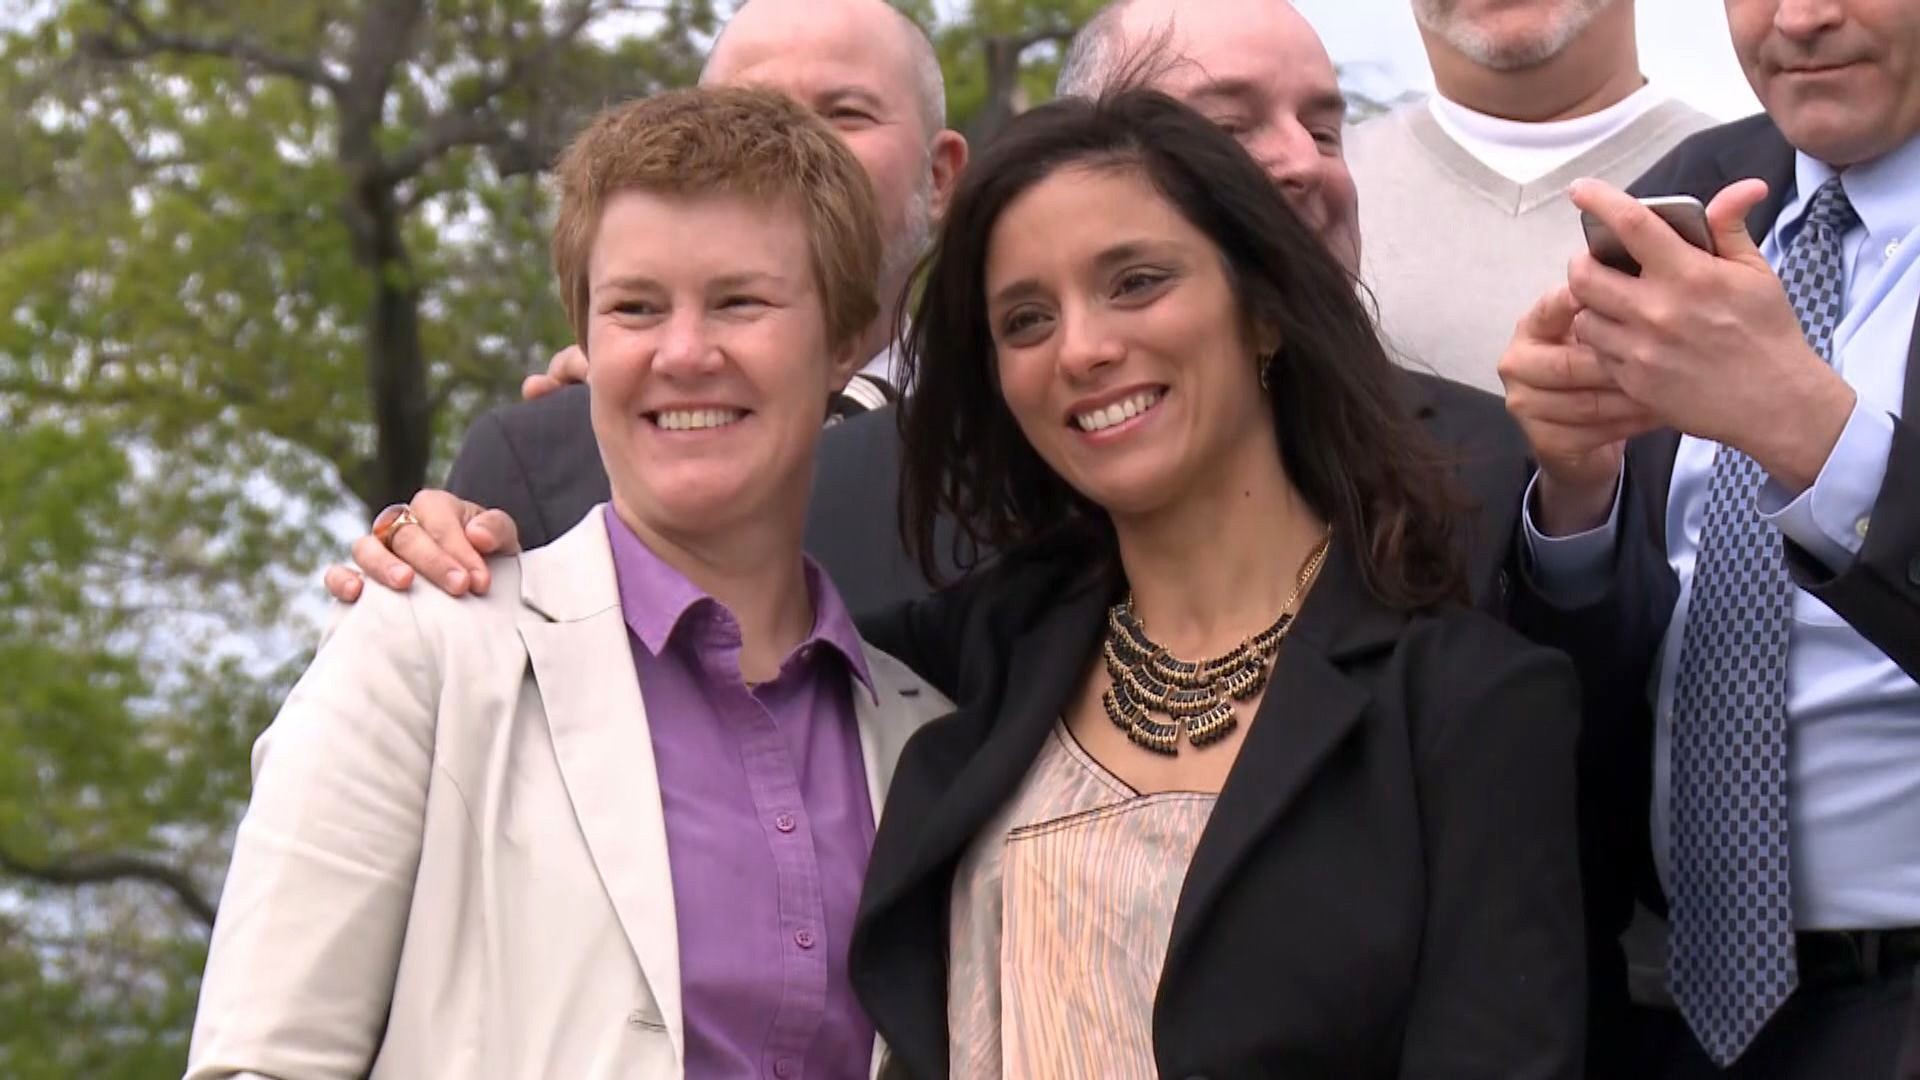 Five years ago, the Supreme Court ruled same-sex marriage legal in all 50 states. The landmark case started locally with a couple and attorney in Knoxville.